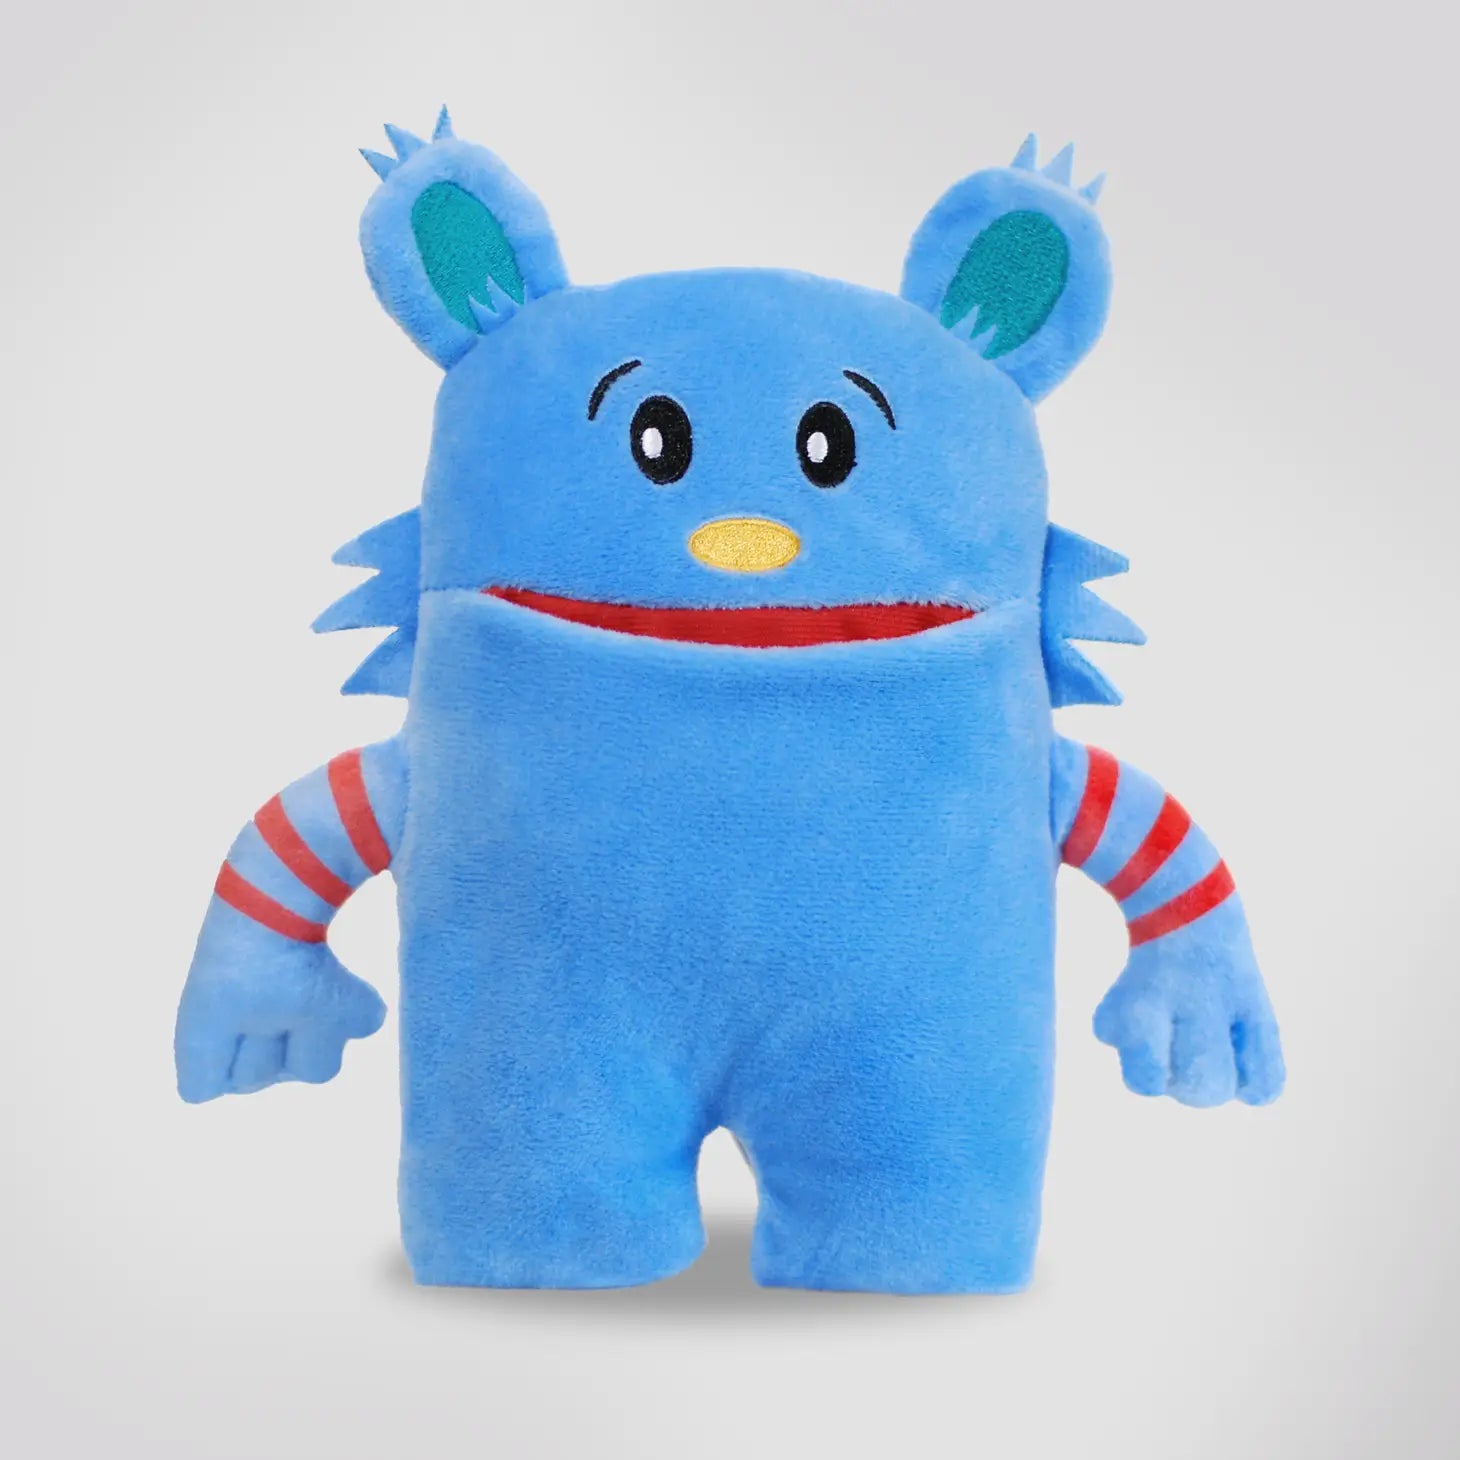 Blue the Friendly Monster Tooth Pillow